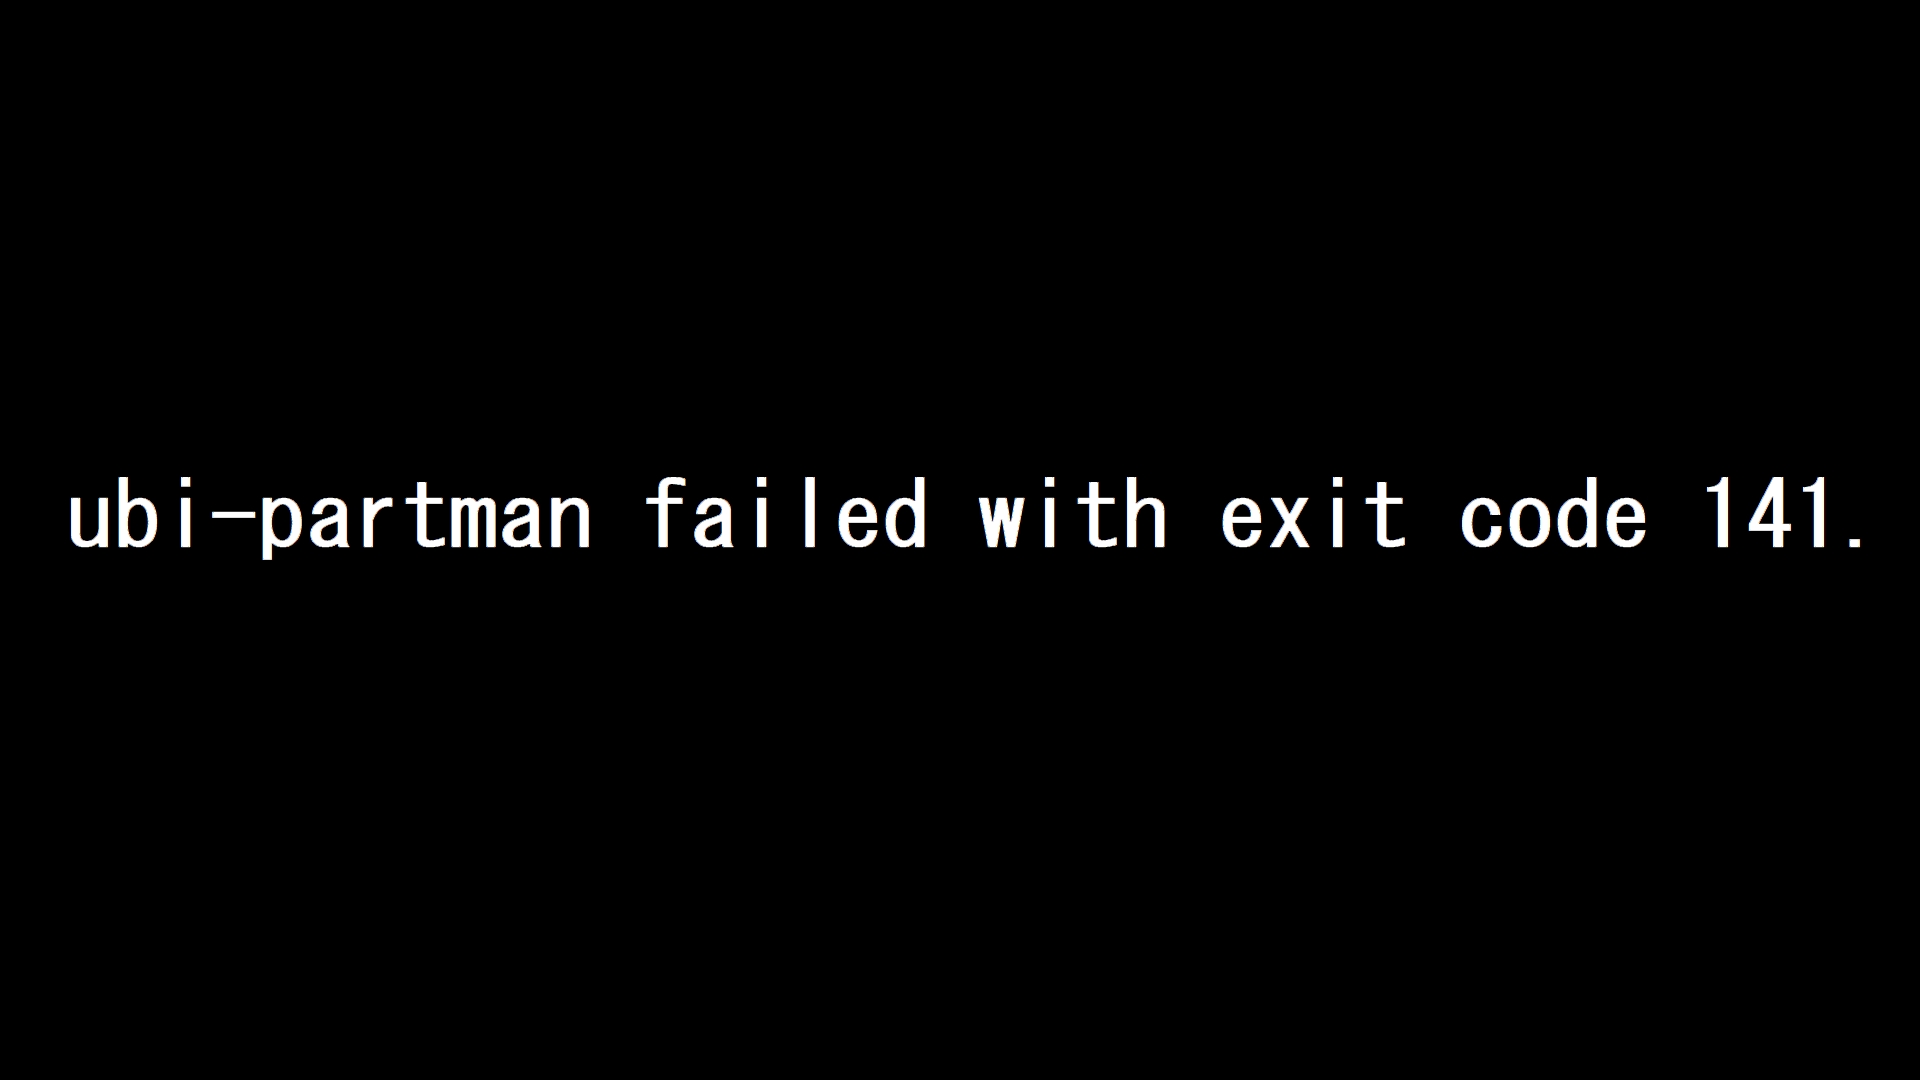 Failed with result exit code